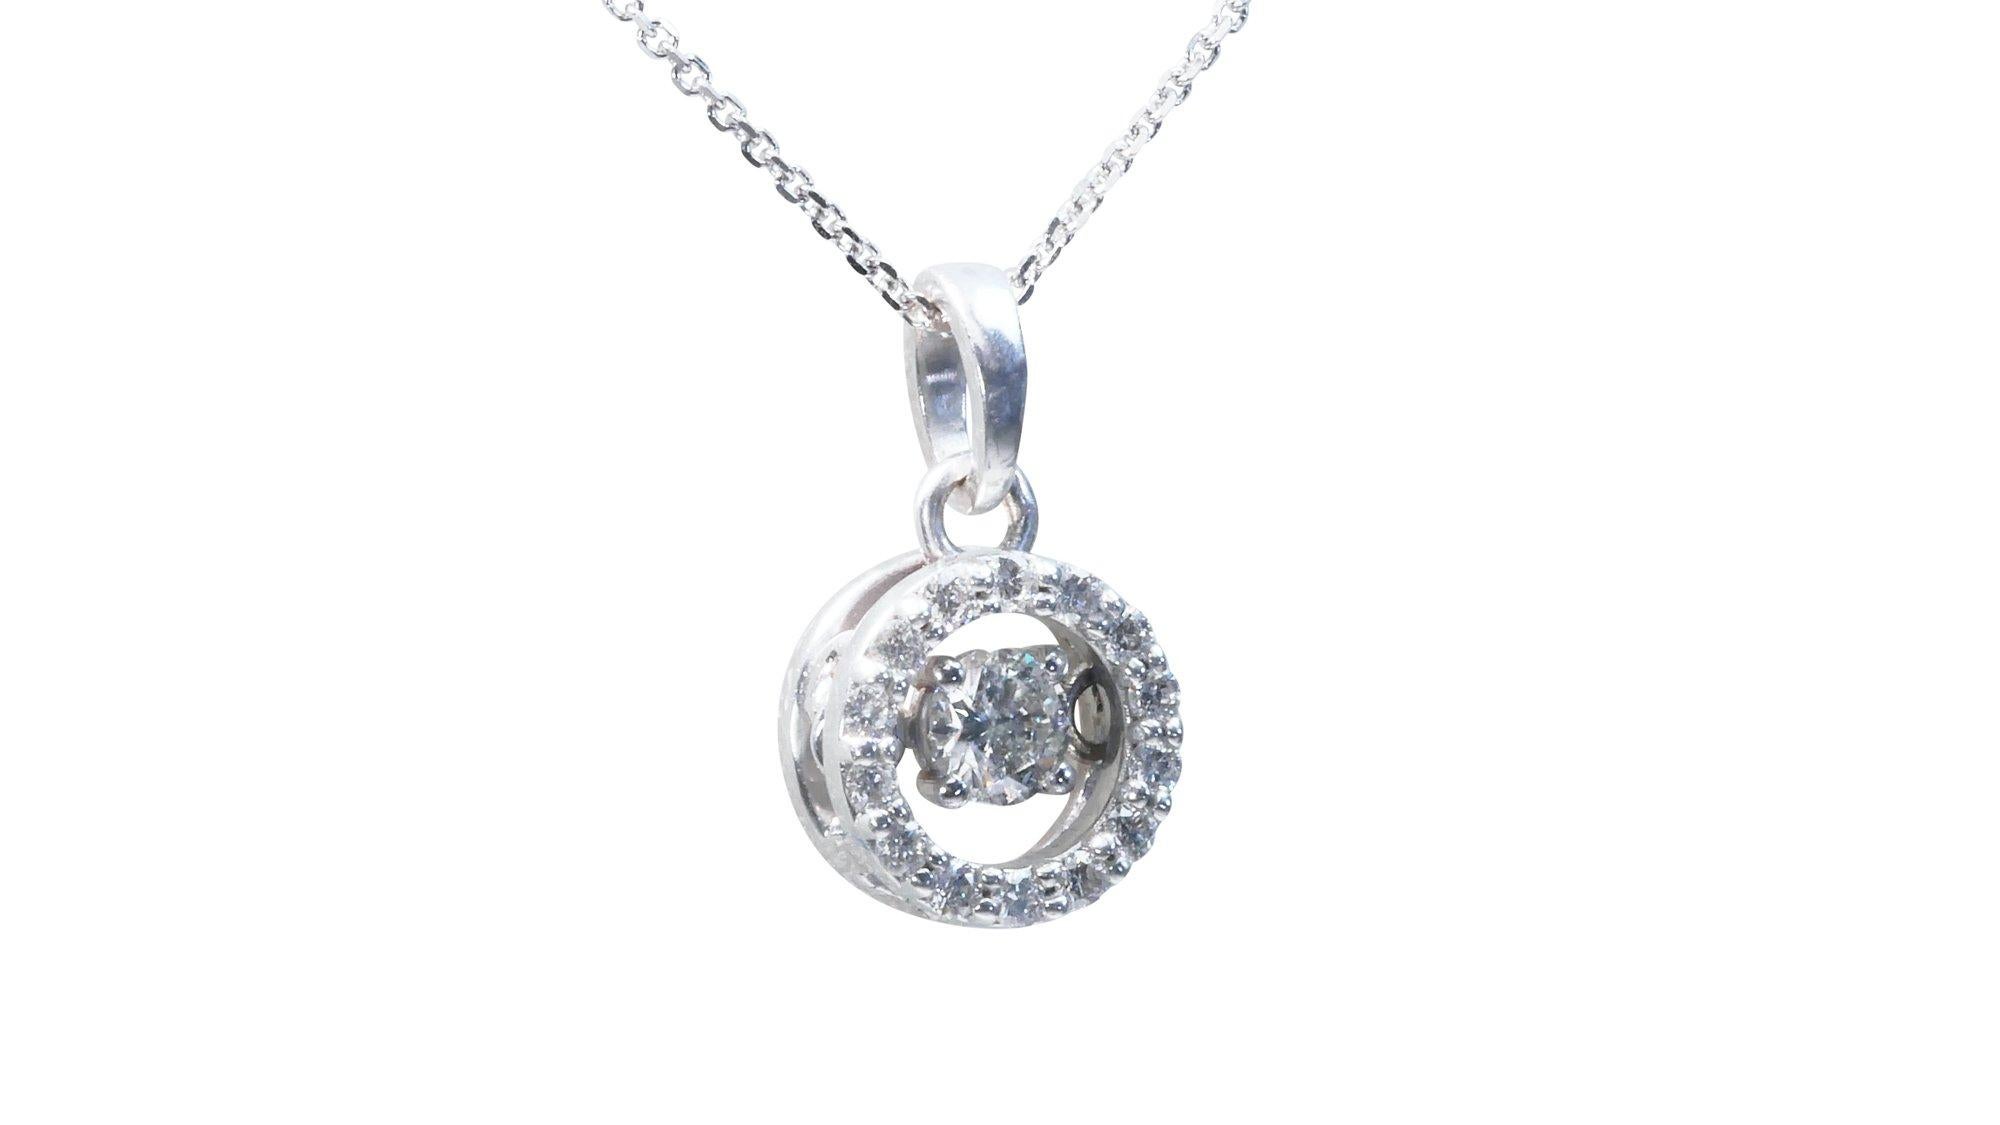 Beautiful White Gold Pendant with Chain with 0.35 Carat Natural Diamond-IGI Cert 1